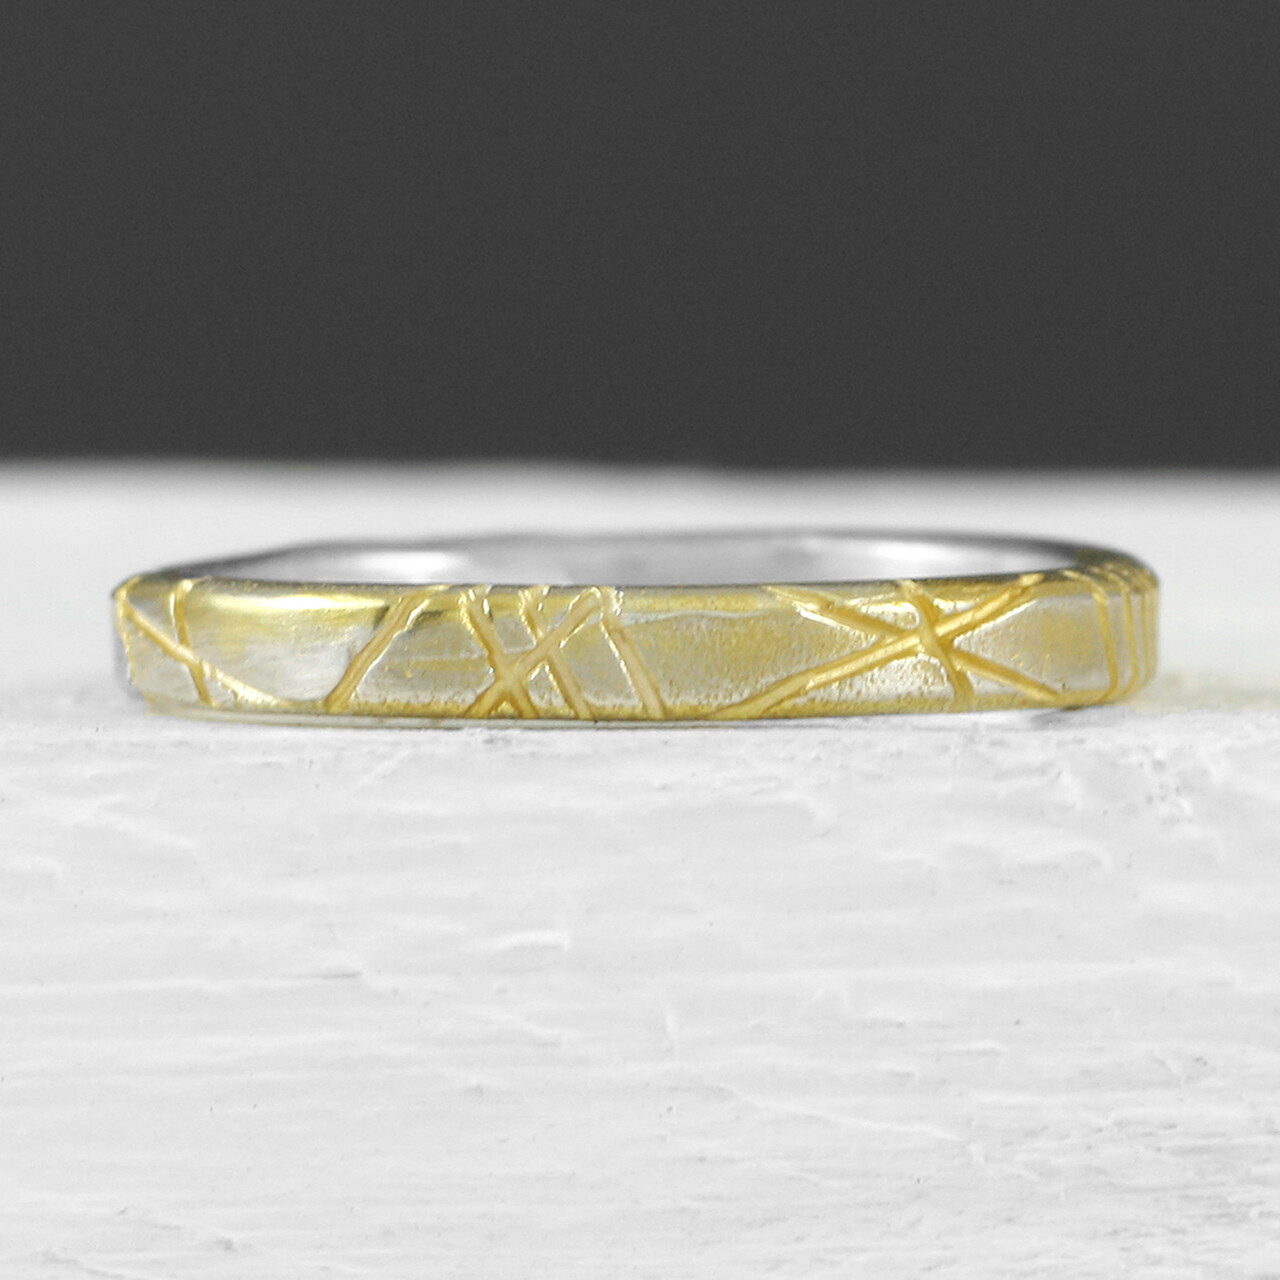 Etched Gold-Plated Slim Silver Ring By Fi Mehra